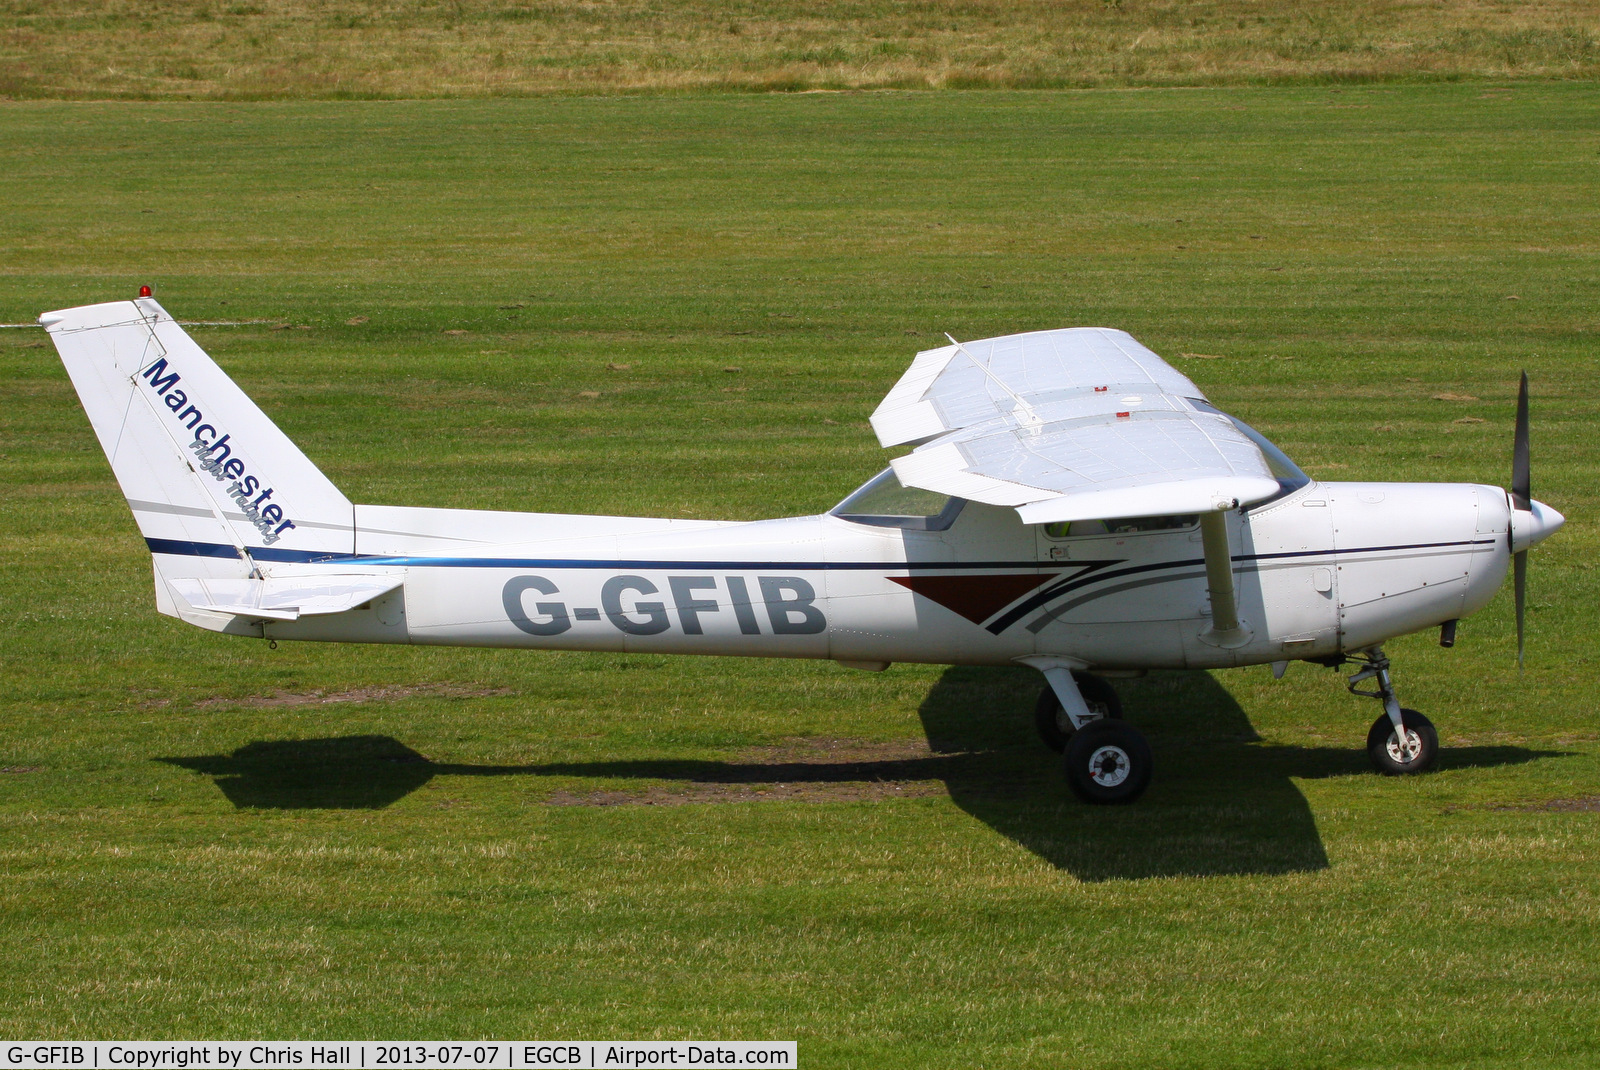 G-GFIB, 1979 Reims F152 C/N 1556, at the Barton open day and fly in